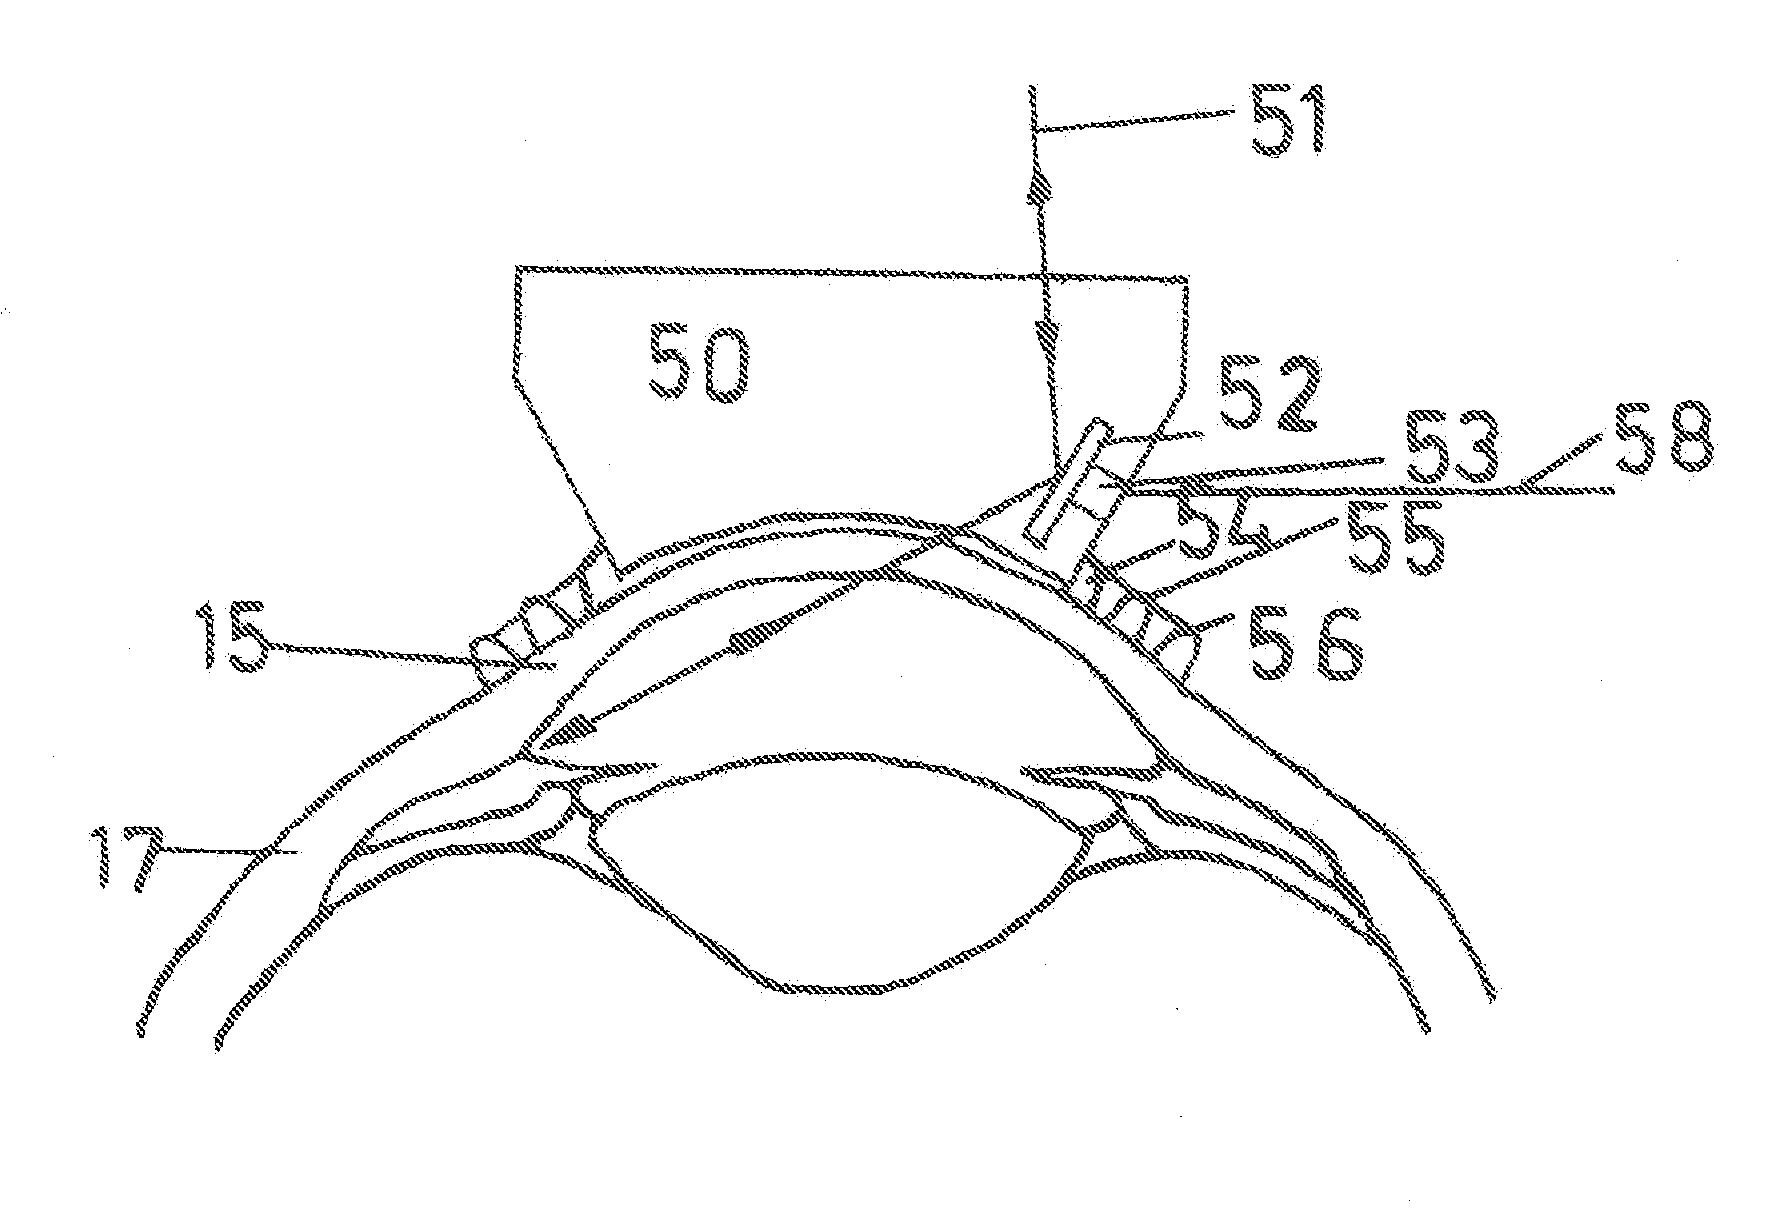 Methods and Apparatuses for the Treatment of Glaucoma using visible and infrared ultrashort laser pulses